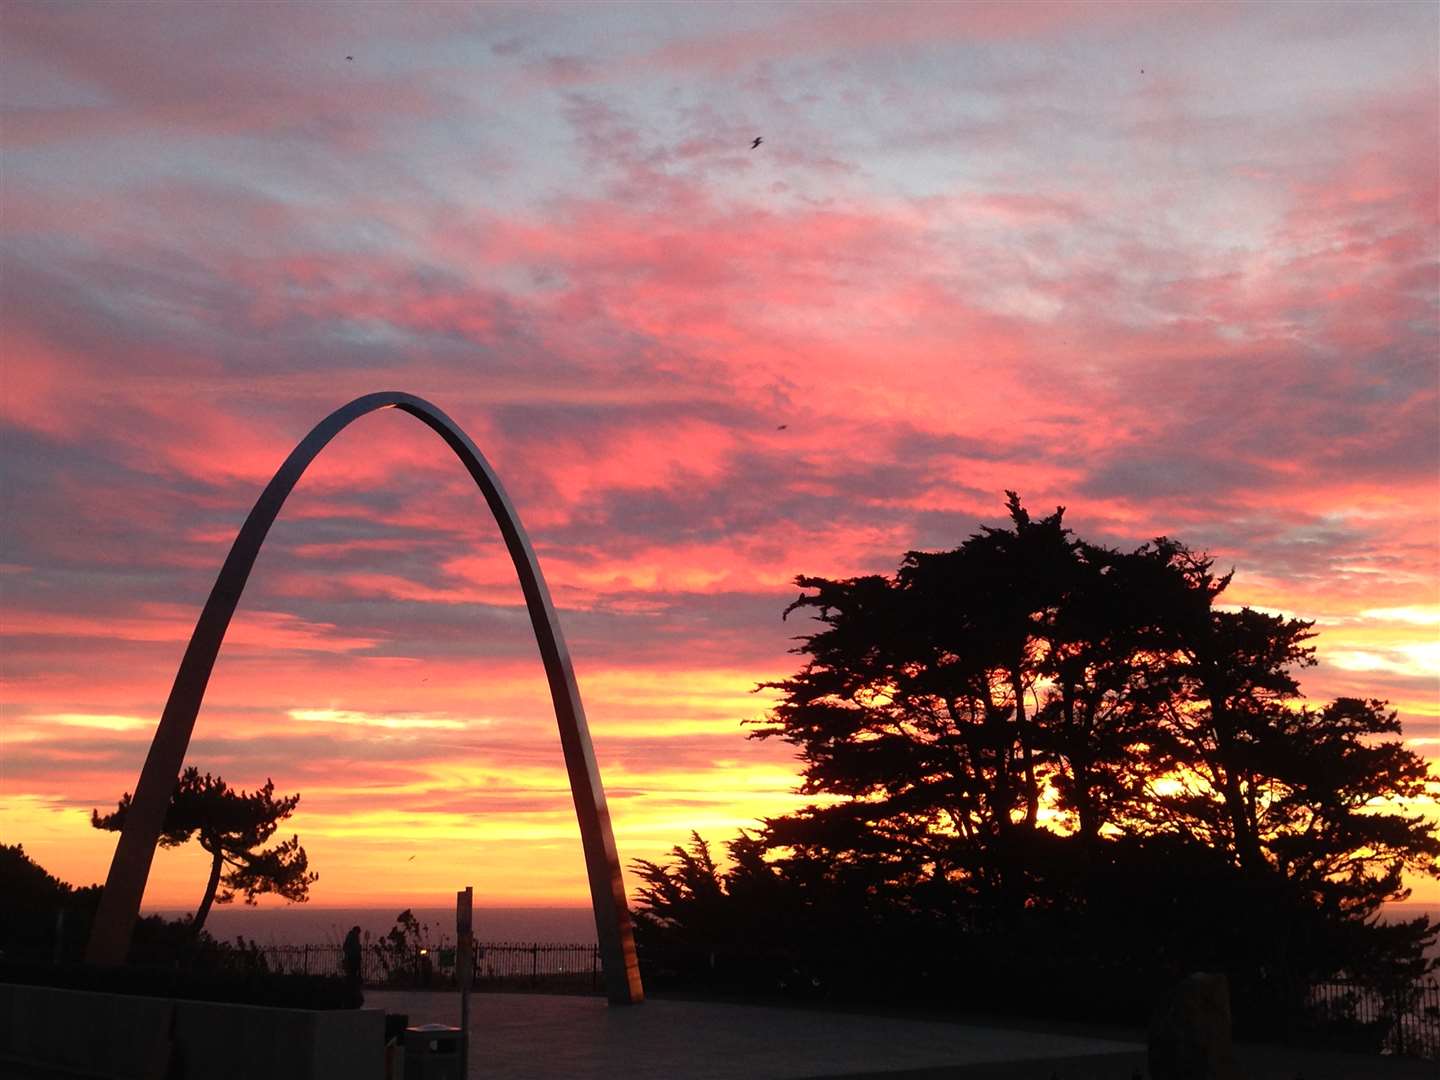 Sunrise over the Step Short arch on The Leas in Folkestone